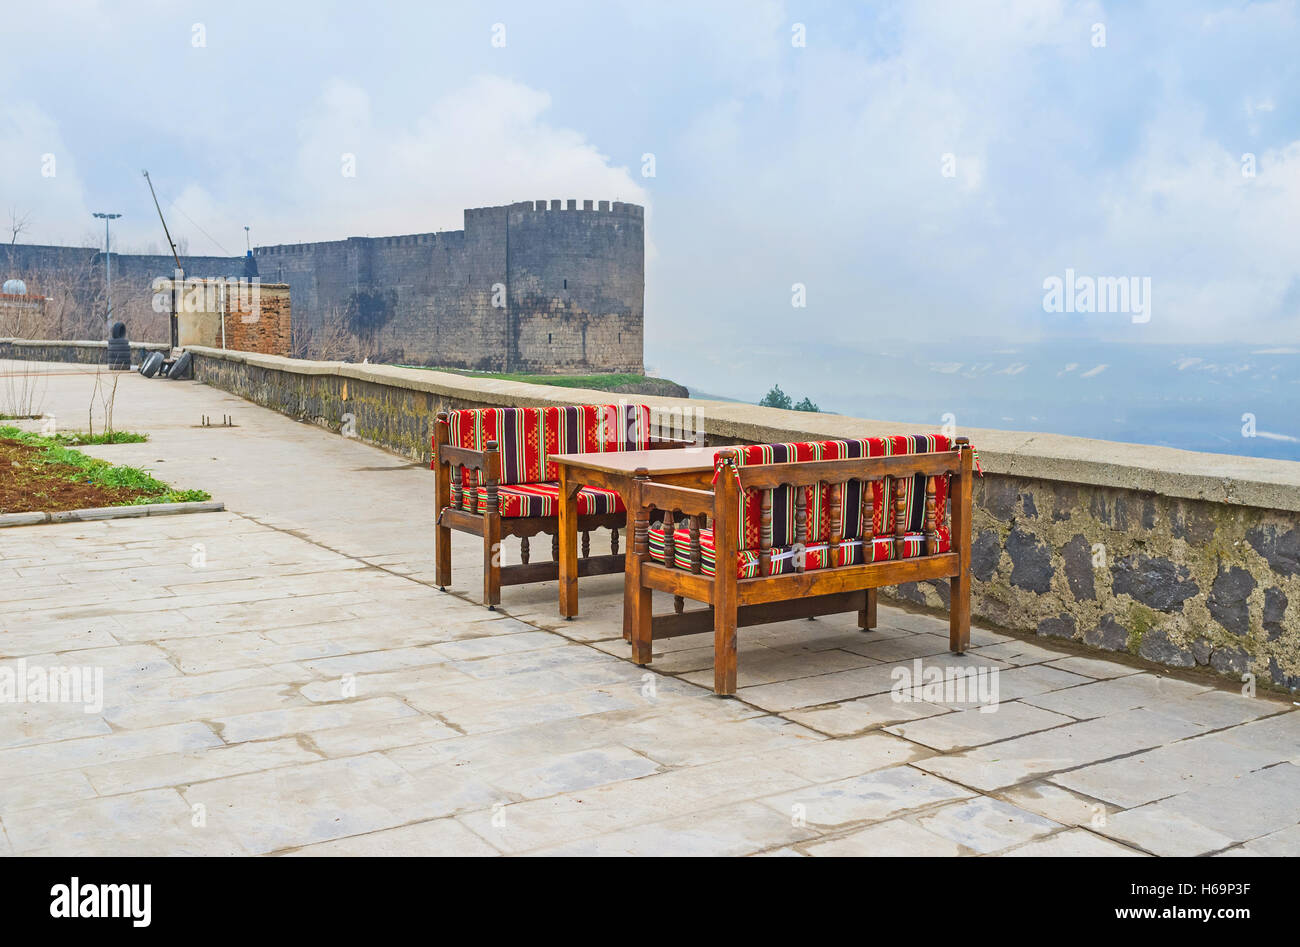 The outdoor cafe, located outside the old citadel walls of Diyarbakir with the foggy view on the Mesopotamian plain, Turkey. Stock Photo